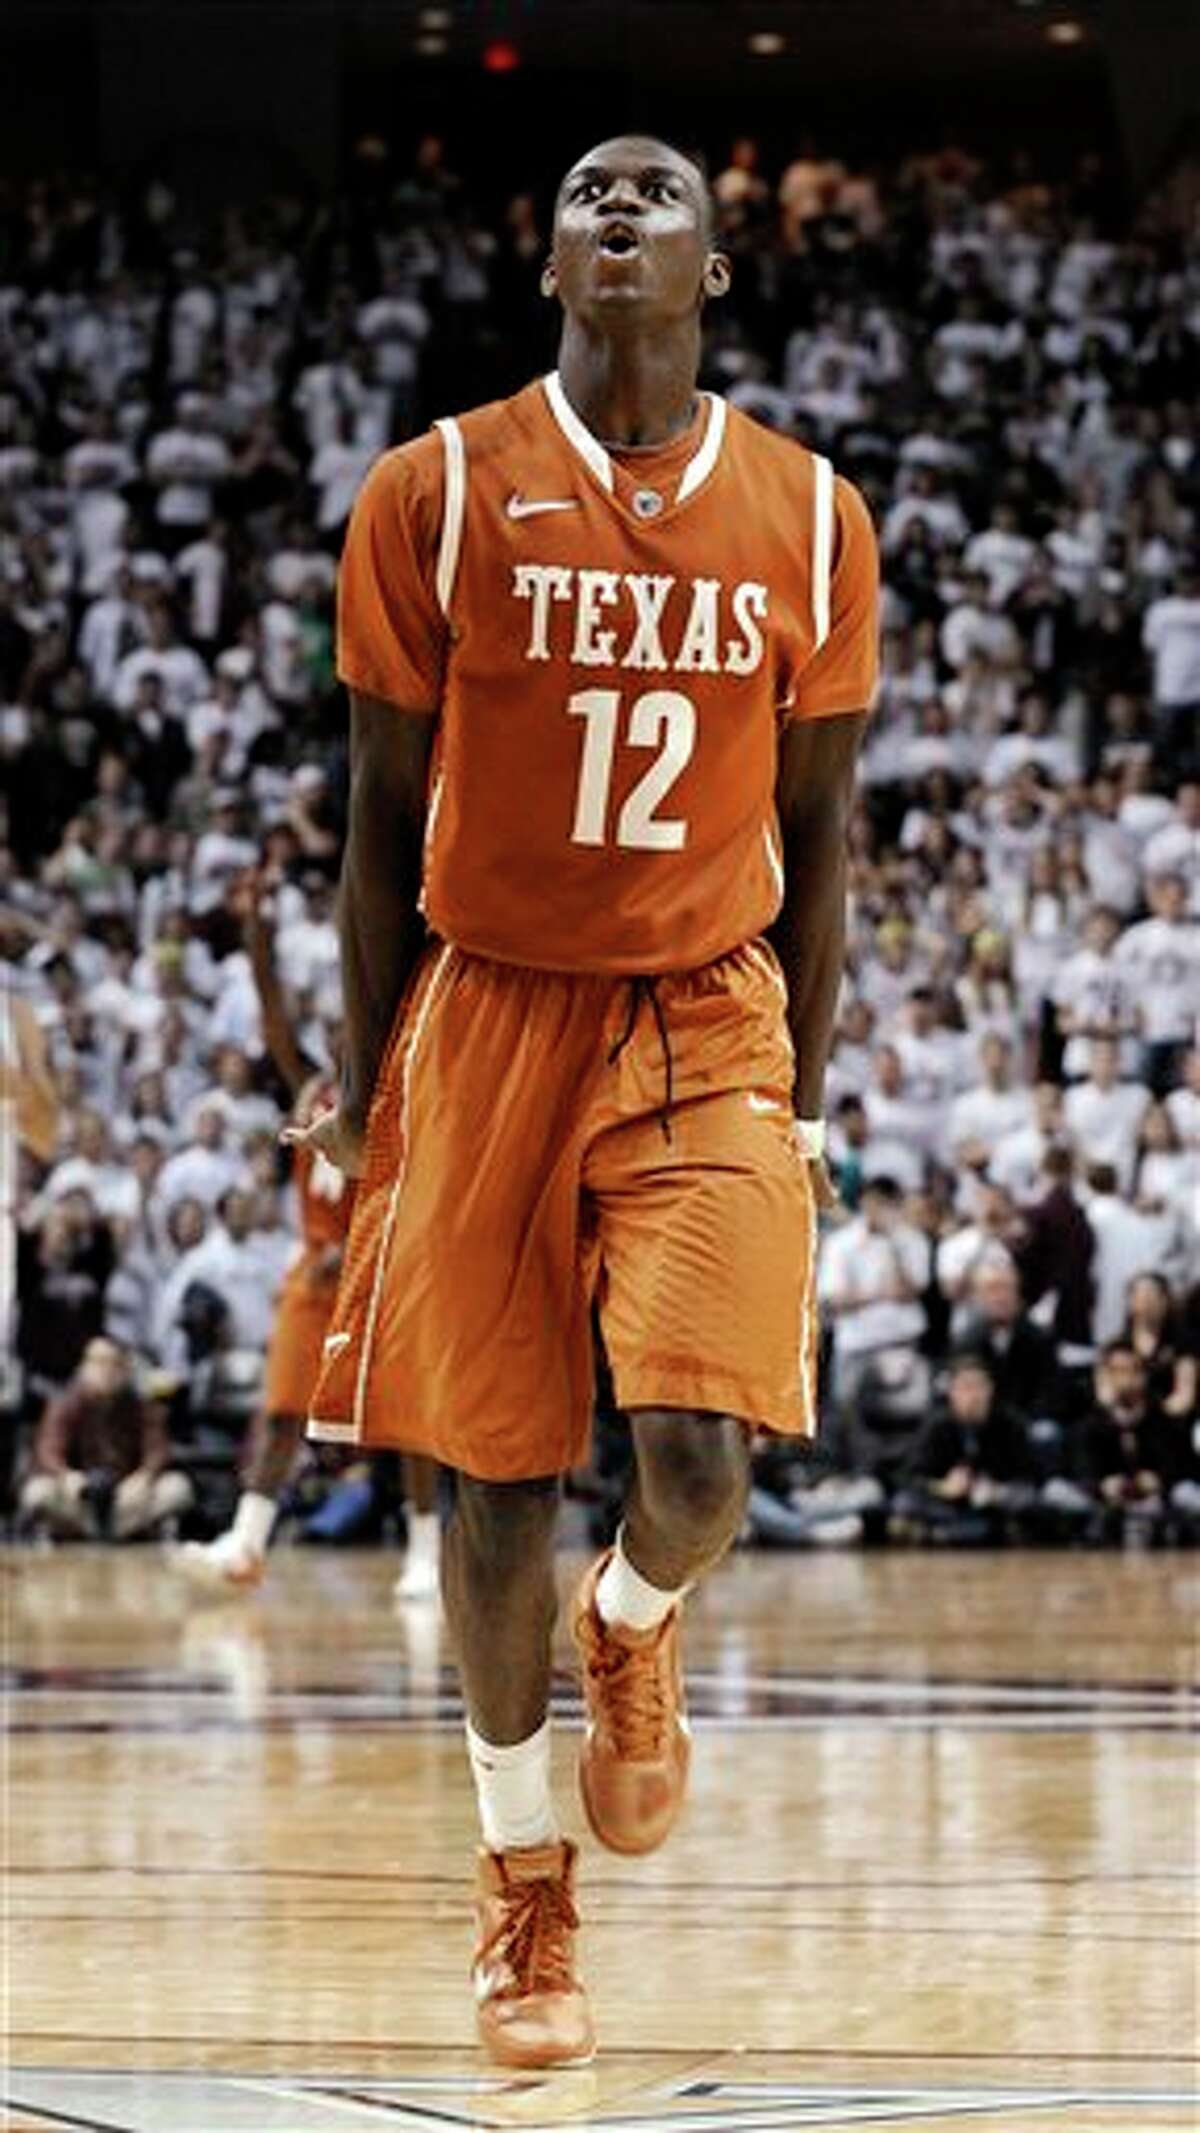 Texas' Myck Kabongo celebrates at the end of an NCAA college basketball game against Texas A&M on Monday, Feb. 6, 2012, in College Station, Texas. Texas won 70-68. (AP Photo/Pat Sullivan)